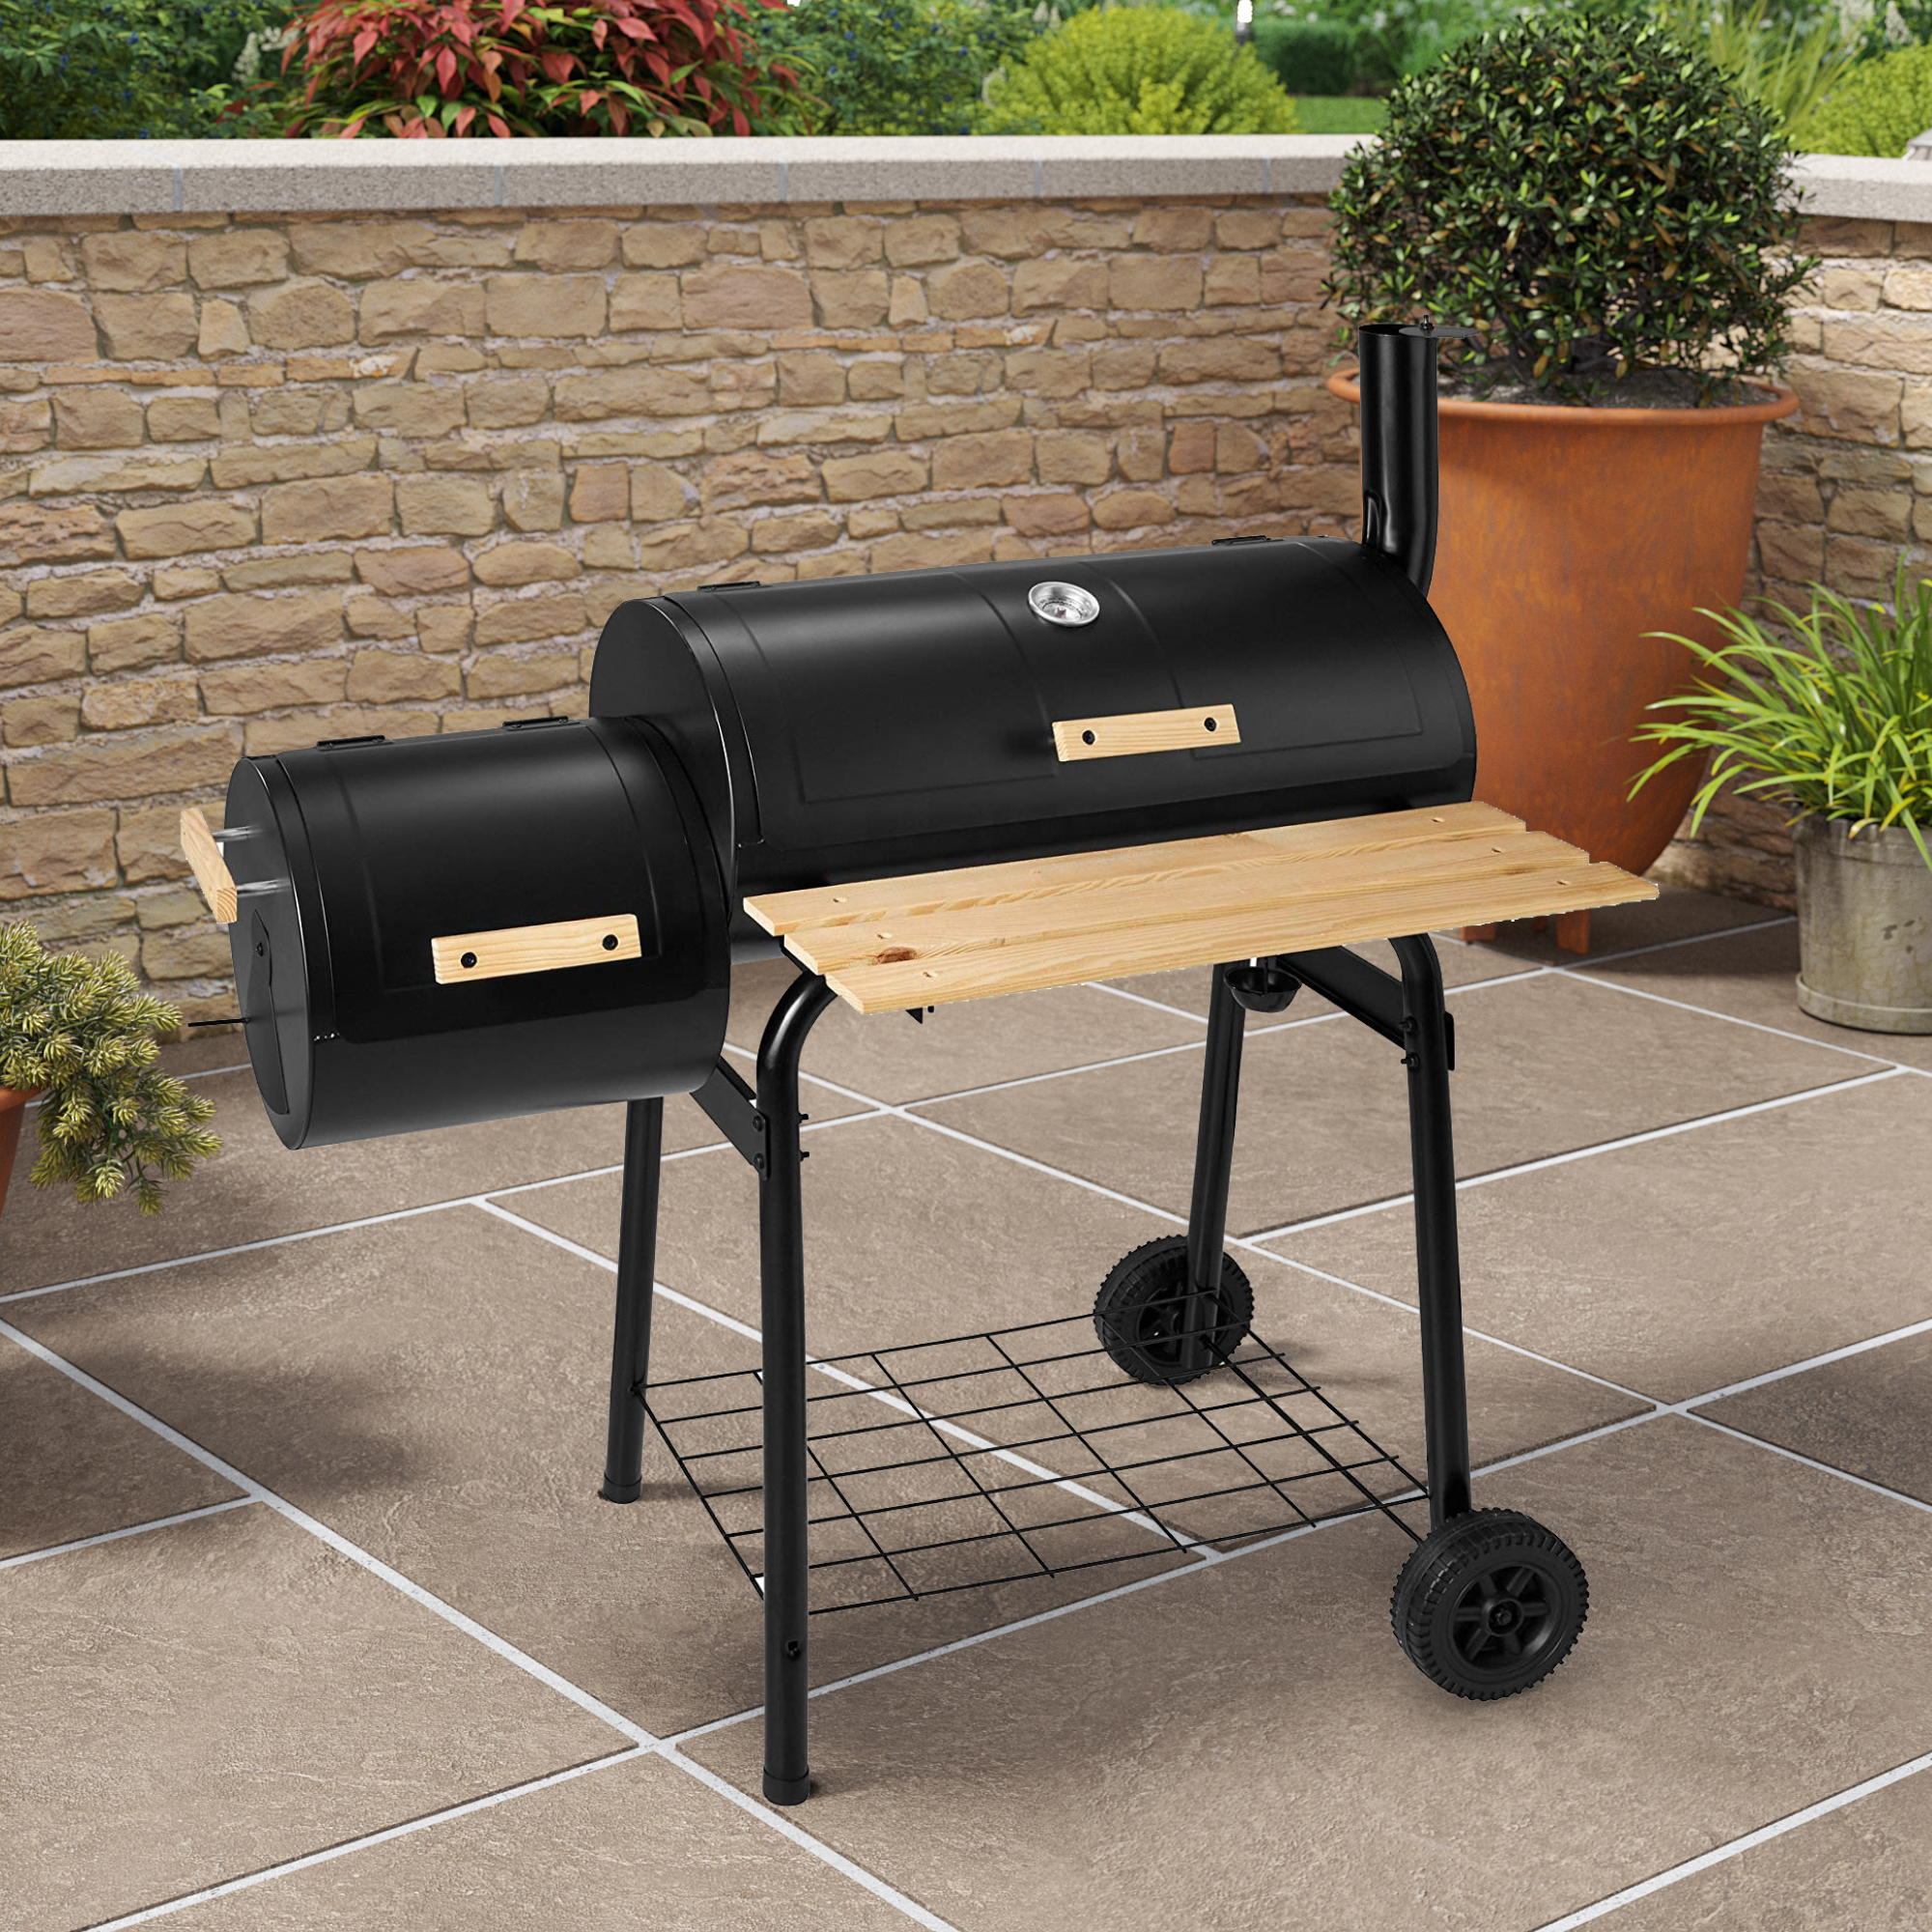 BillyOh Smoker BBQ Charcoal Grill Full Drum + Offset Smoker Barbecue - Portable Full Drum